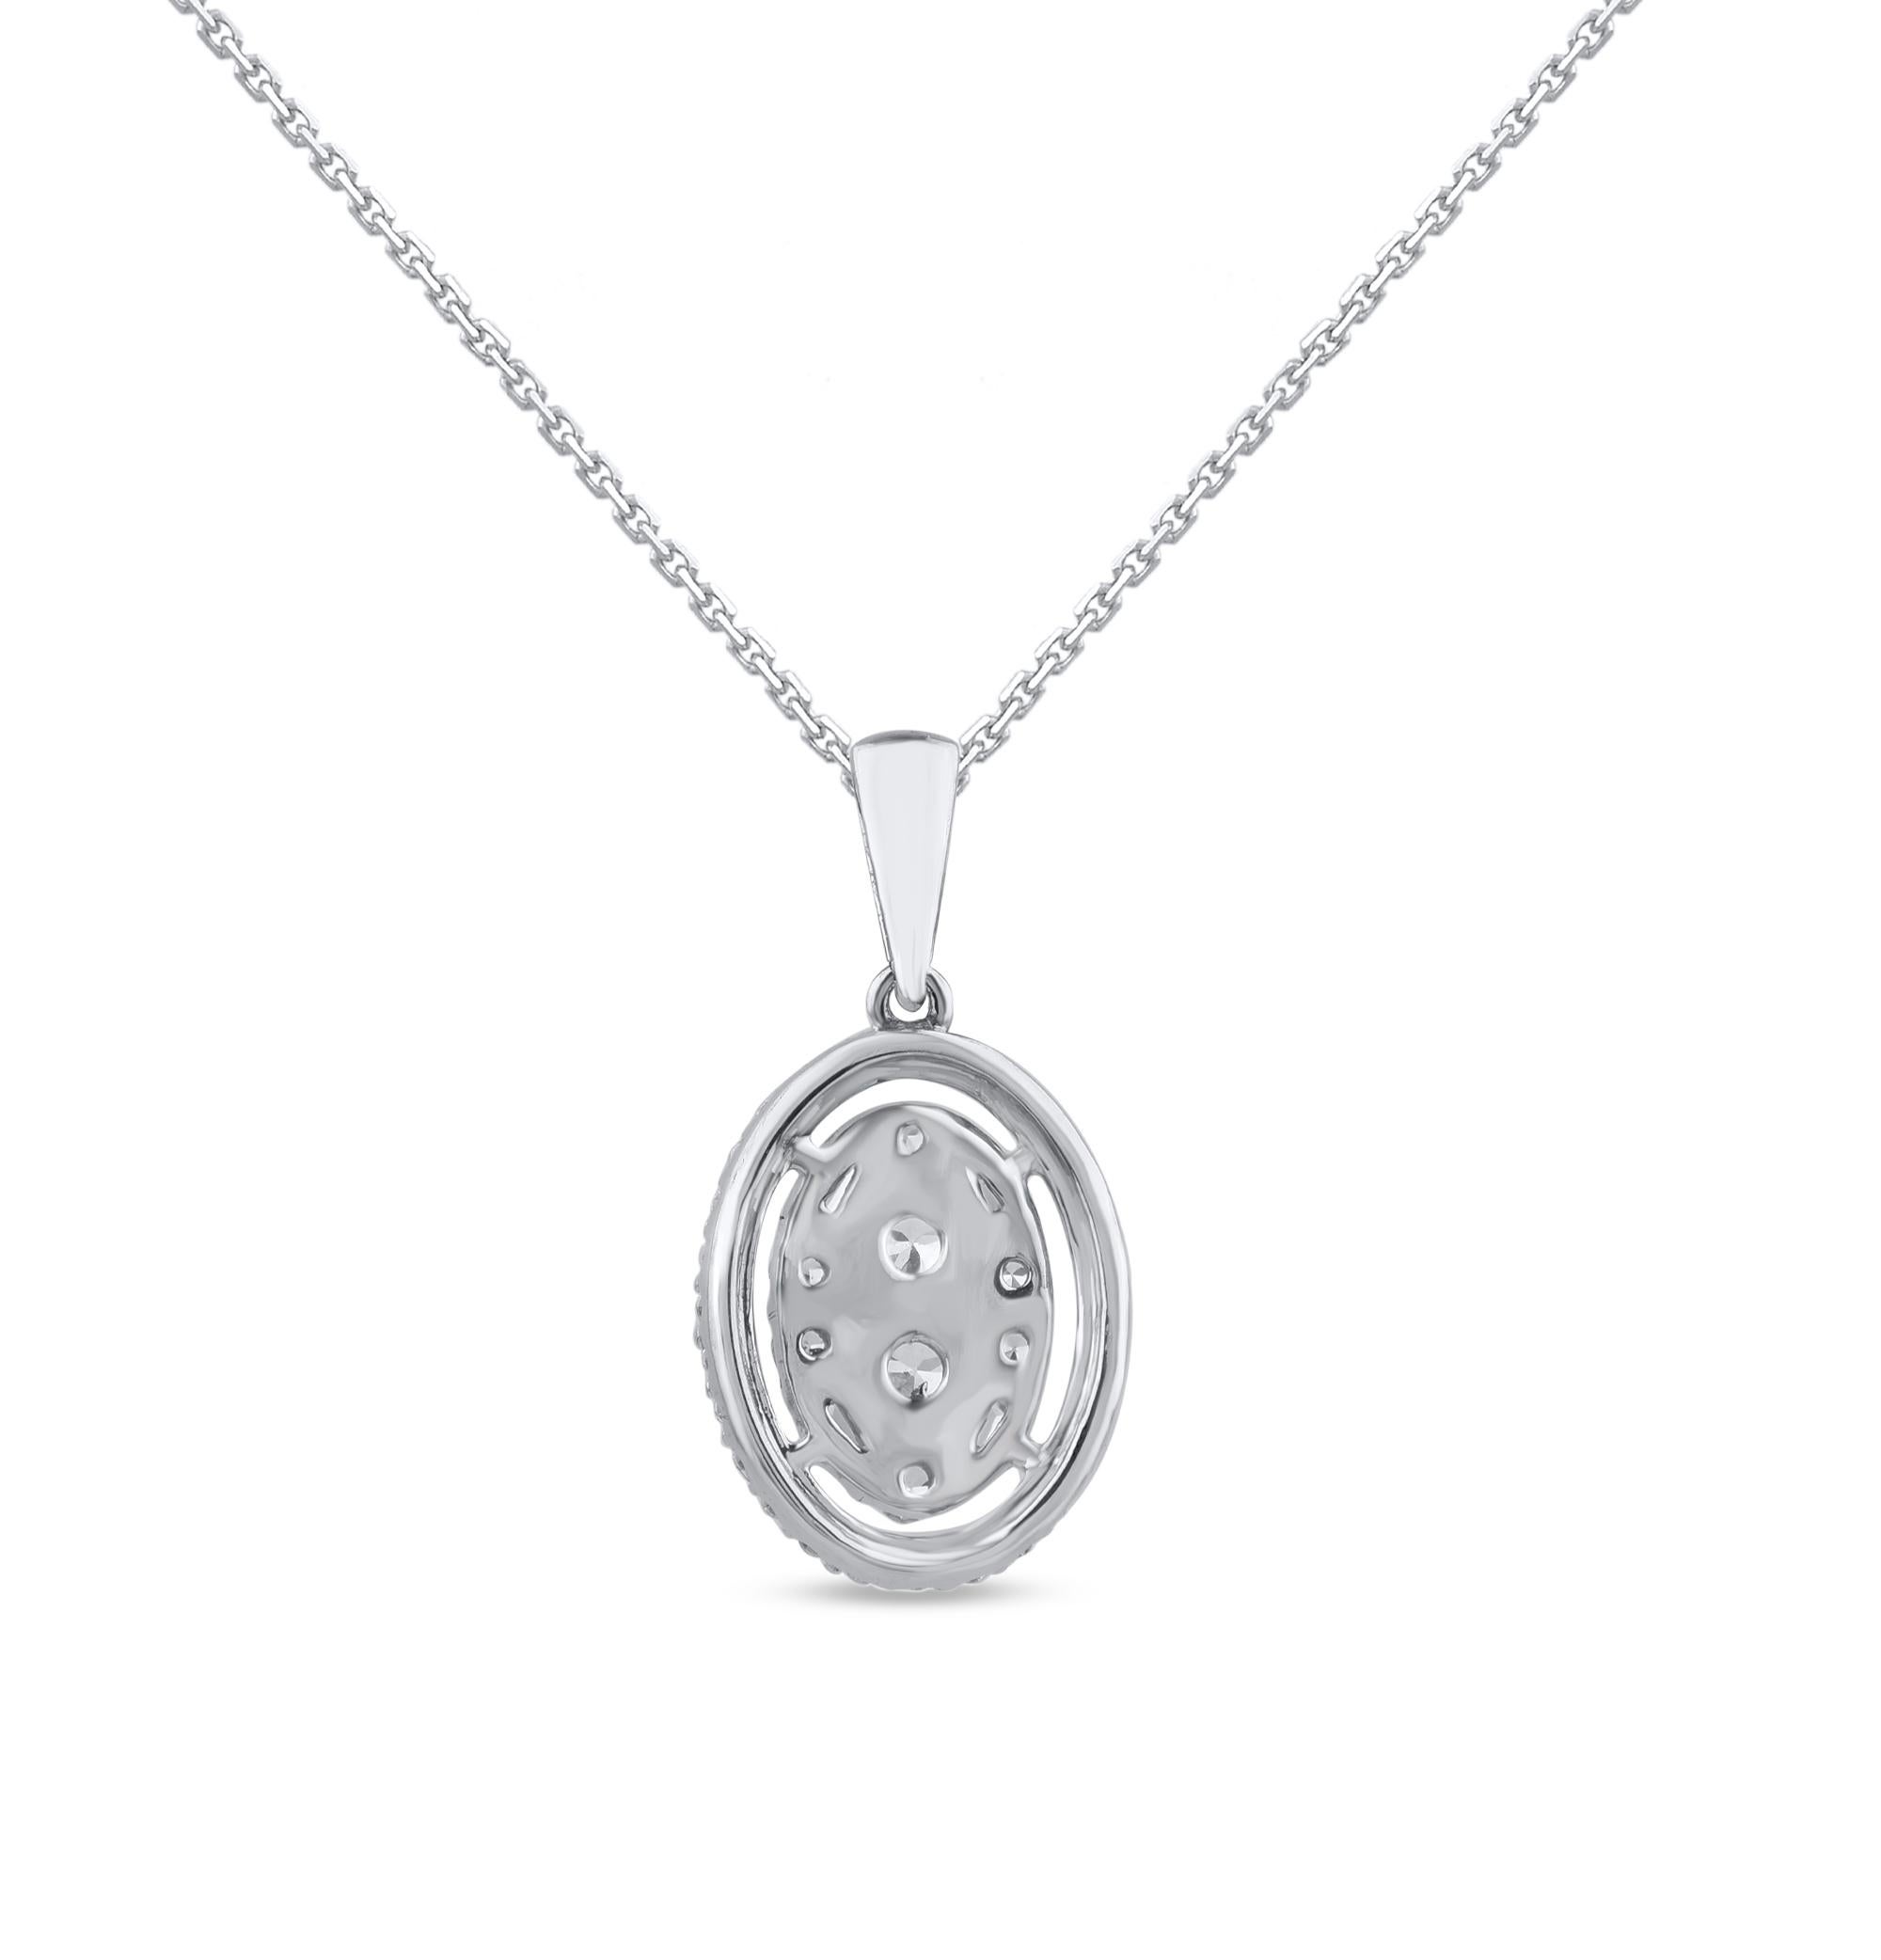 This beautiful oval pendant necklace is studded with 40 single cut, brilliant cut round diamonds and baguette cut natural diamonds in prong setting. The total diamond weight of these pendant is 0.50 carats. All the diamonds are H-I color, I-2